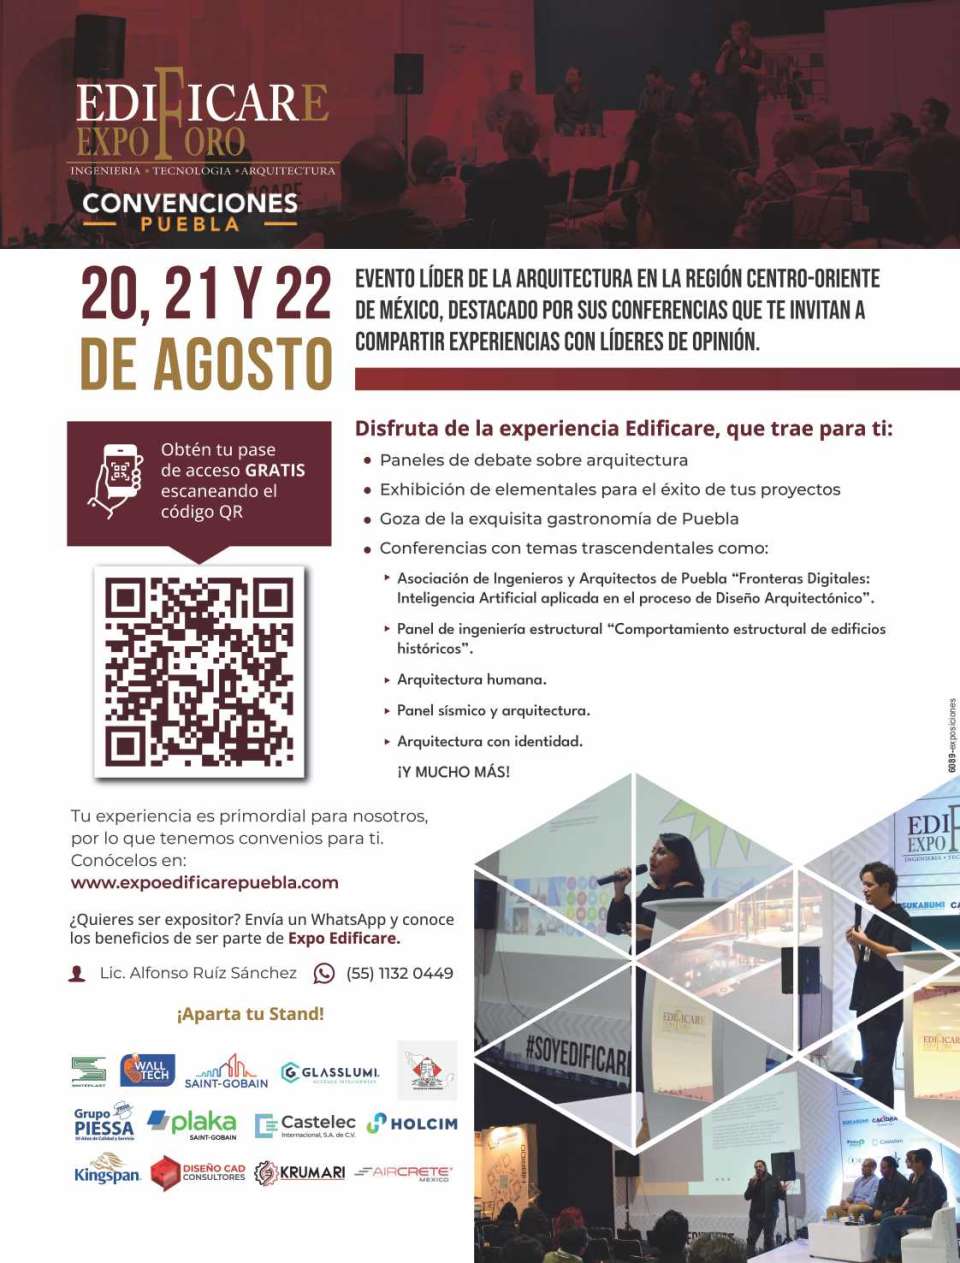 Edificare Forum Expo Puebla. Leading event in the Central-Eastern region of Mexico, from August 20 to 22, 2024 at the William O. Jenkins Convention Center in the City of Puebla.